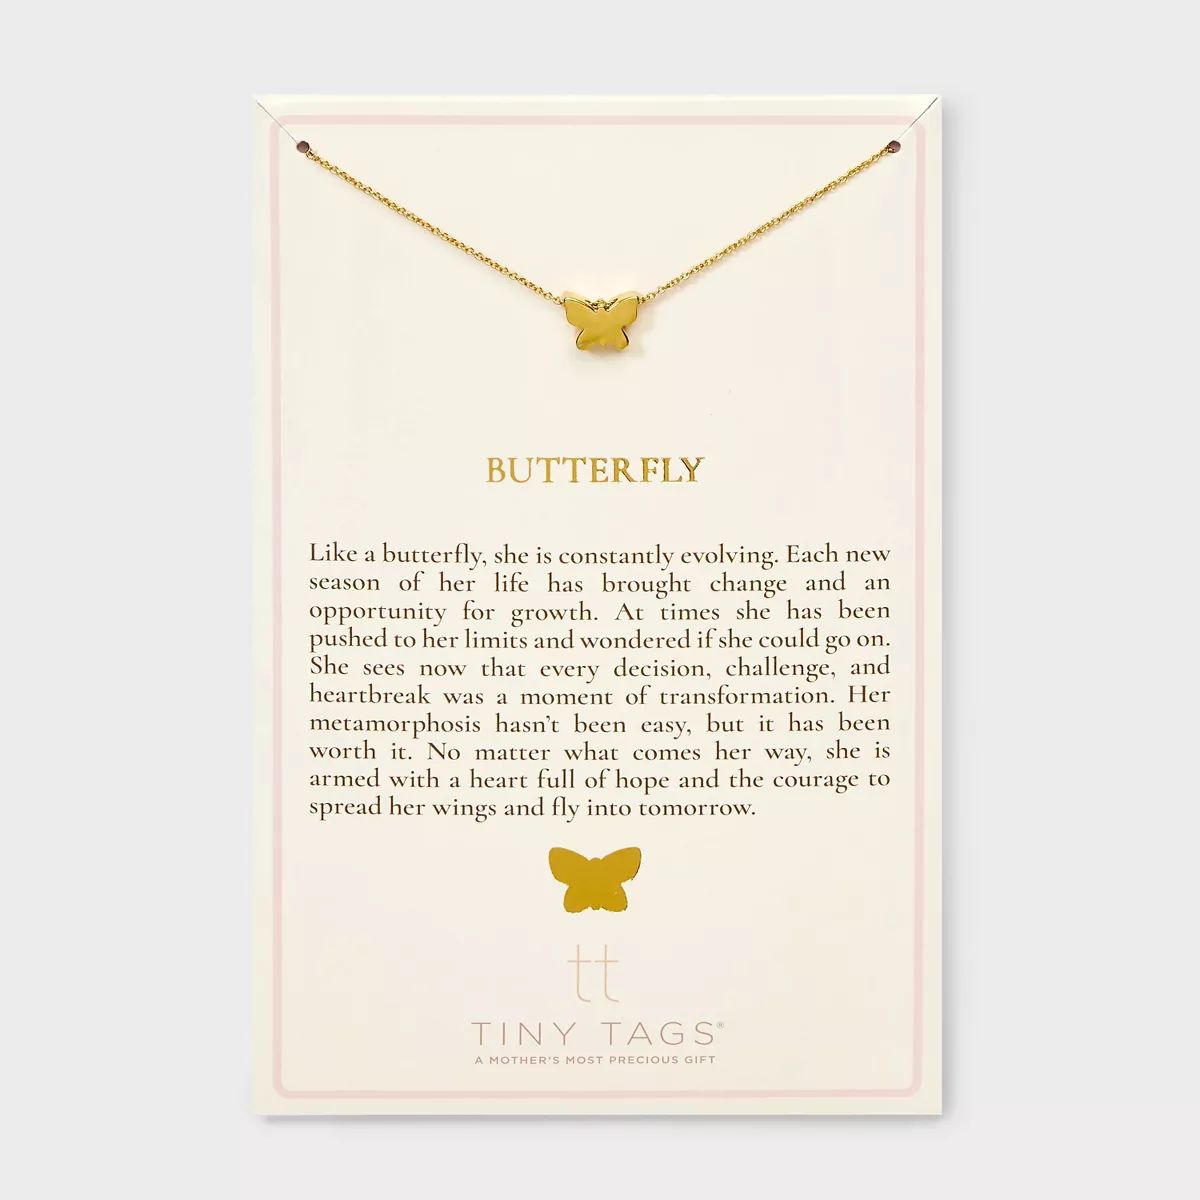 Tiny Tags 14K Gold Ion Plated Butterfly Chain Necklace - Gold | Target